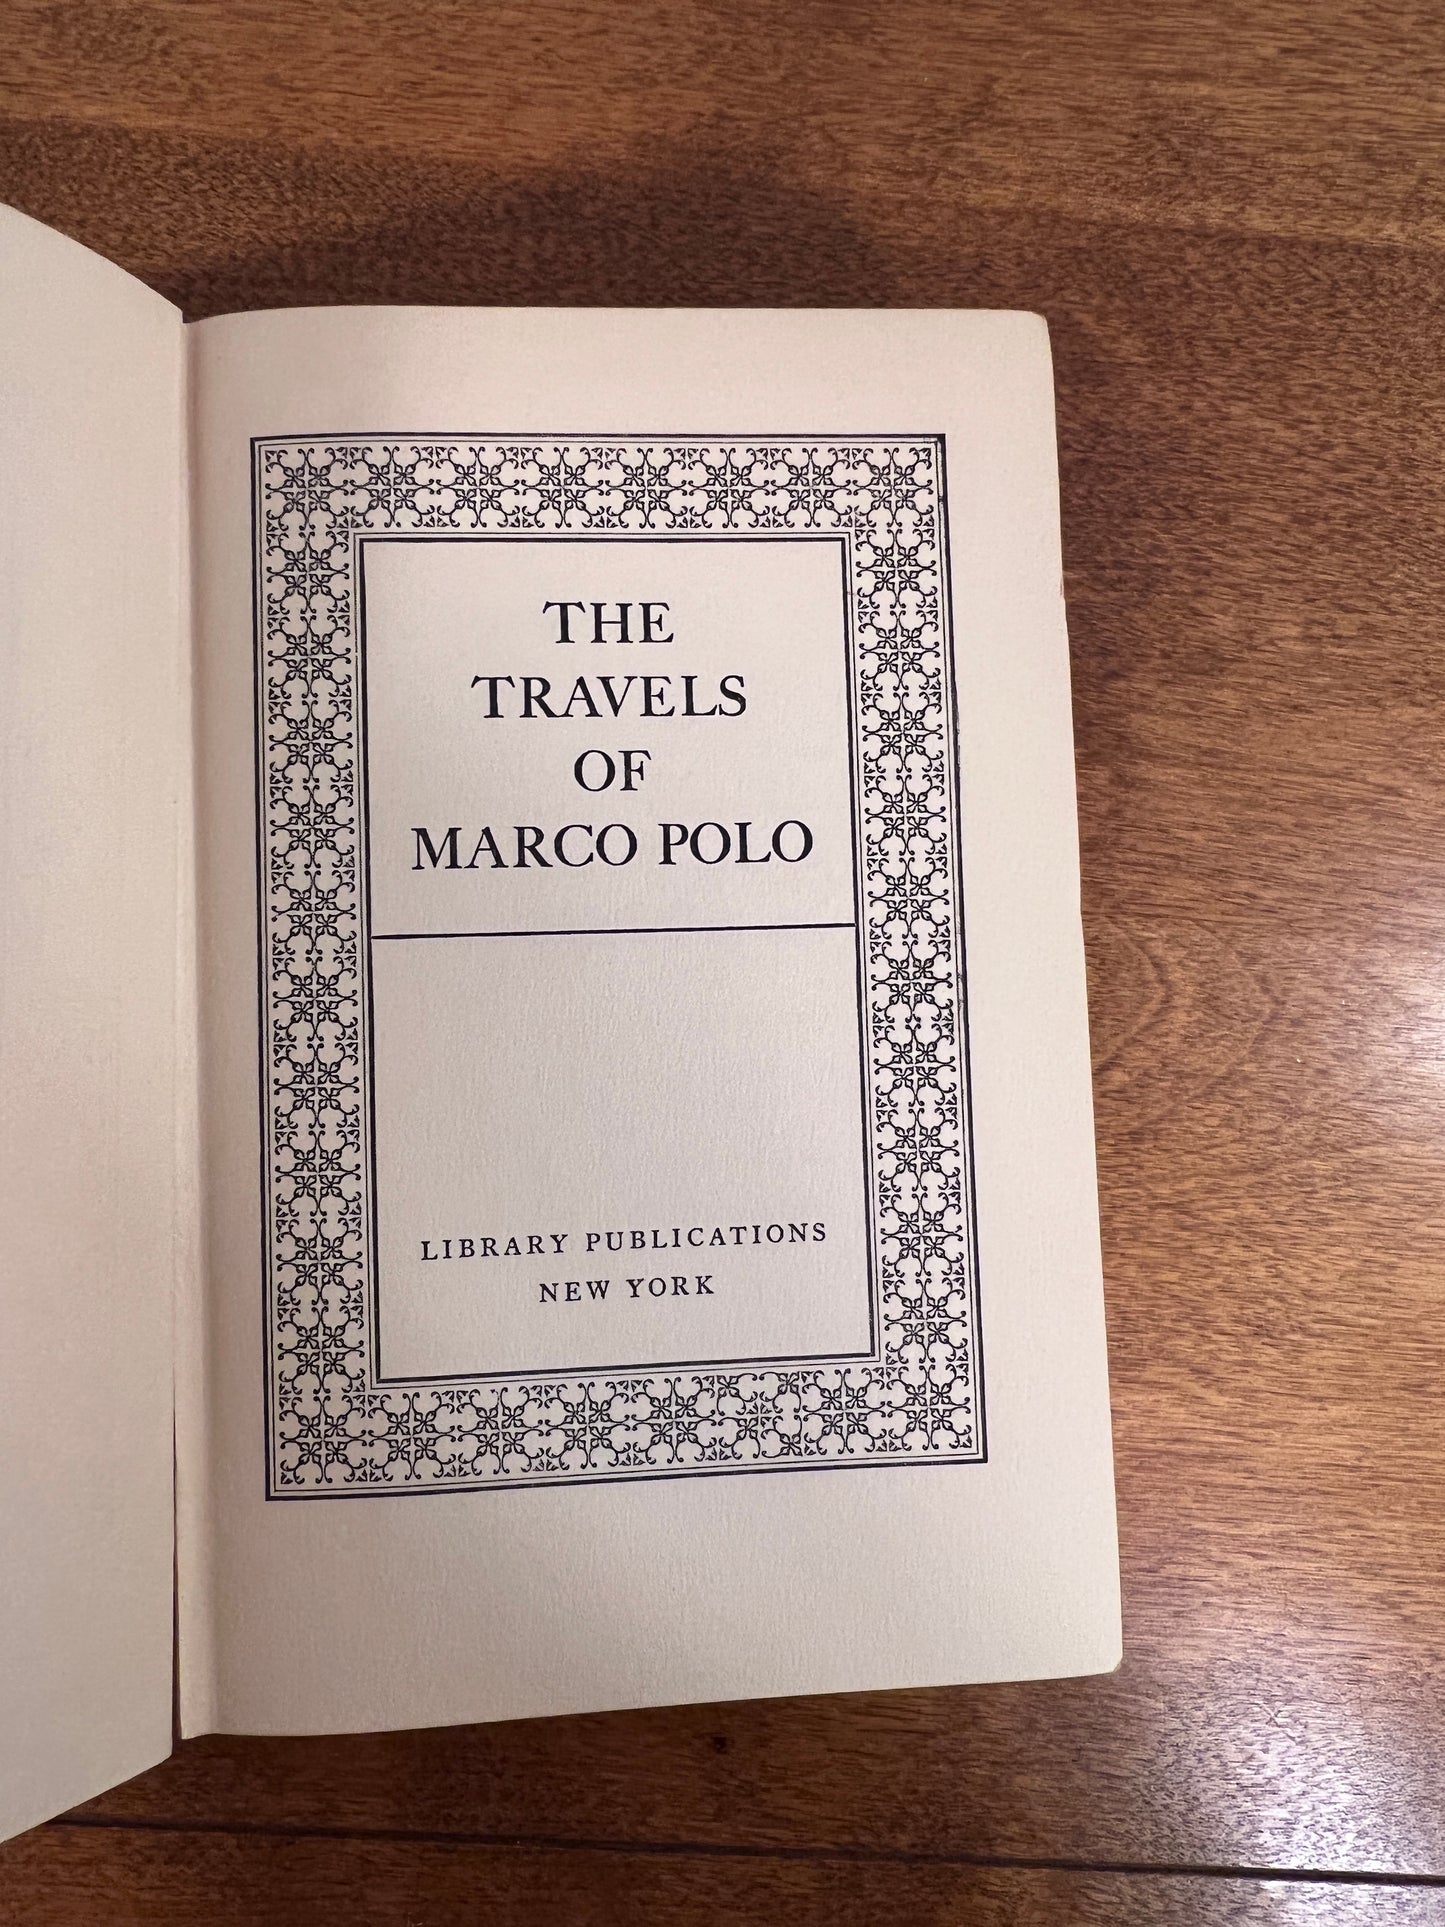 Travels of Marco Polo, World Famous Literature, Library Publications